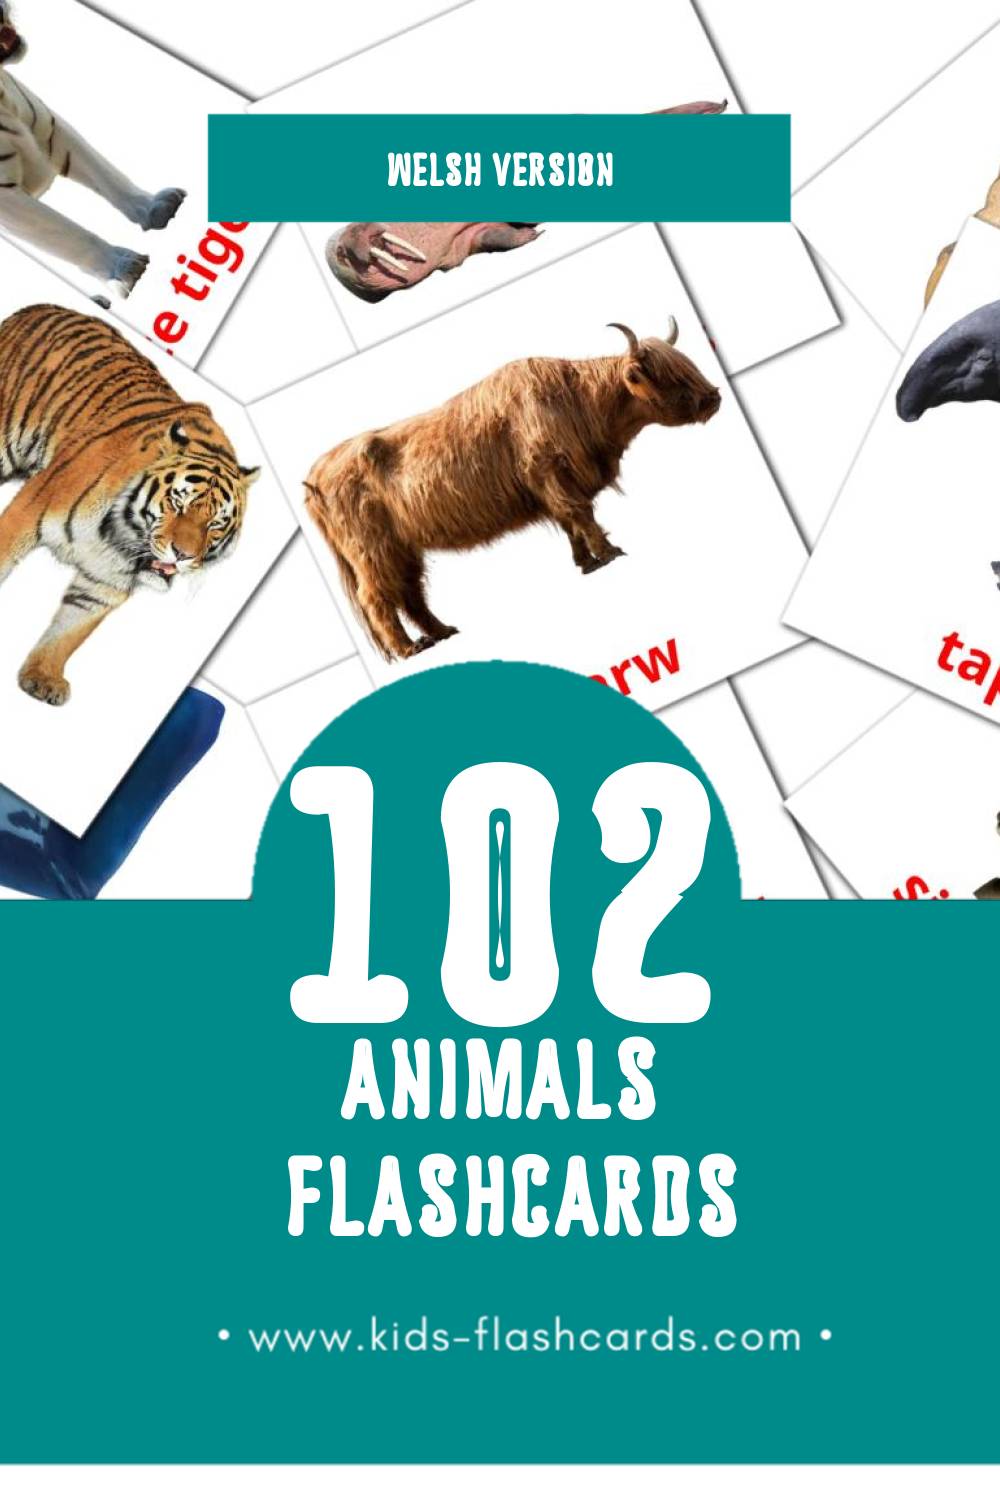 Visual anifail Flashcards for Toddlers (102 cards in Welsh)